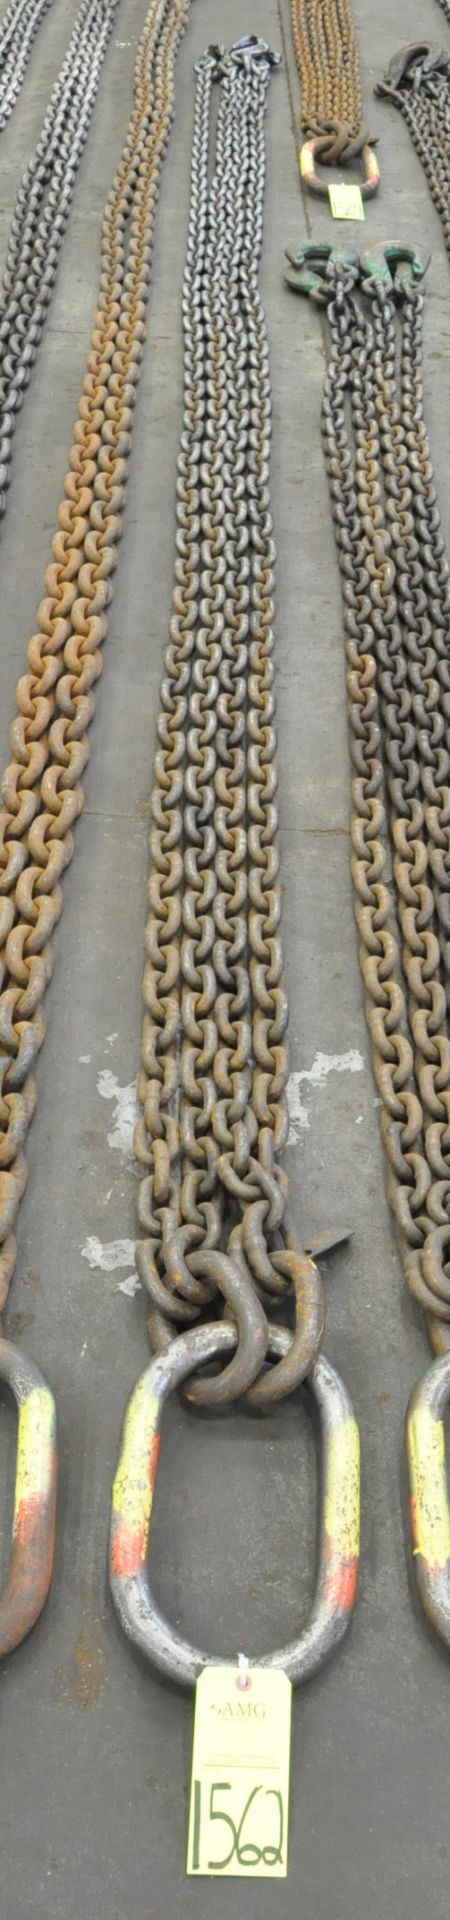 5/8" Link x 16' 6" Long 4-Hook Chain Sling, Cert Tag, (G-19), Tag)